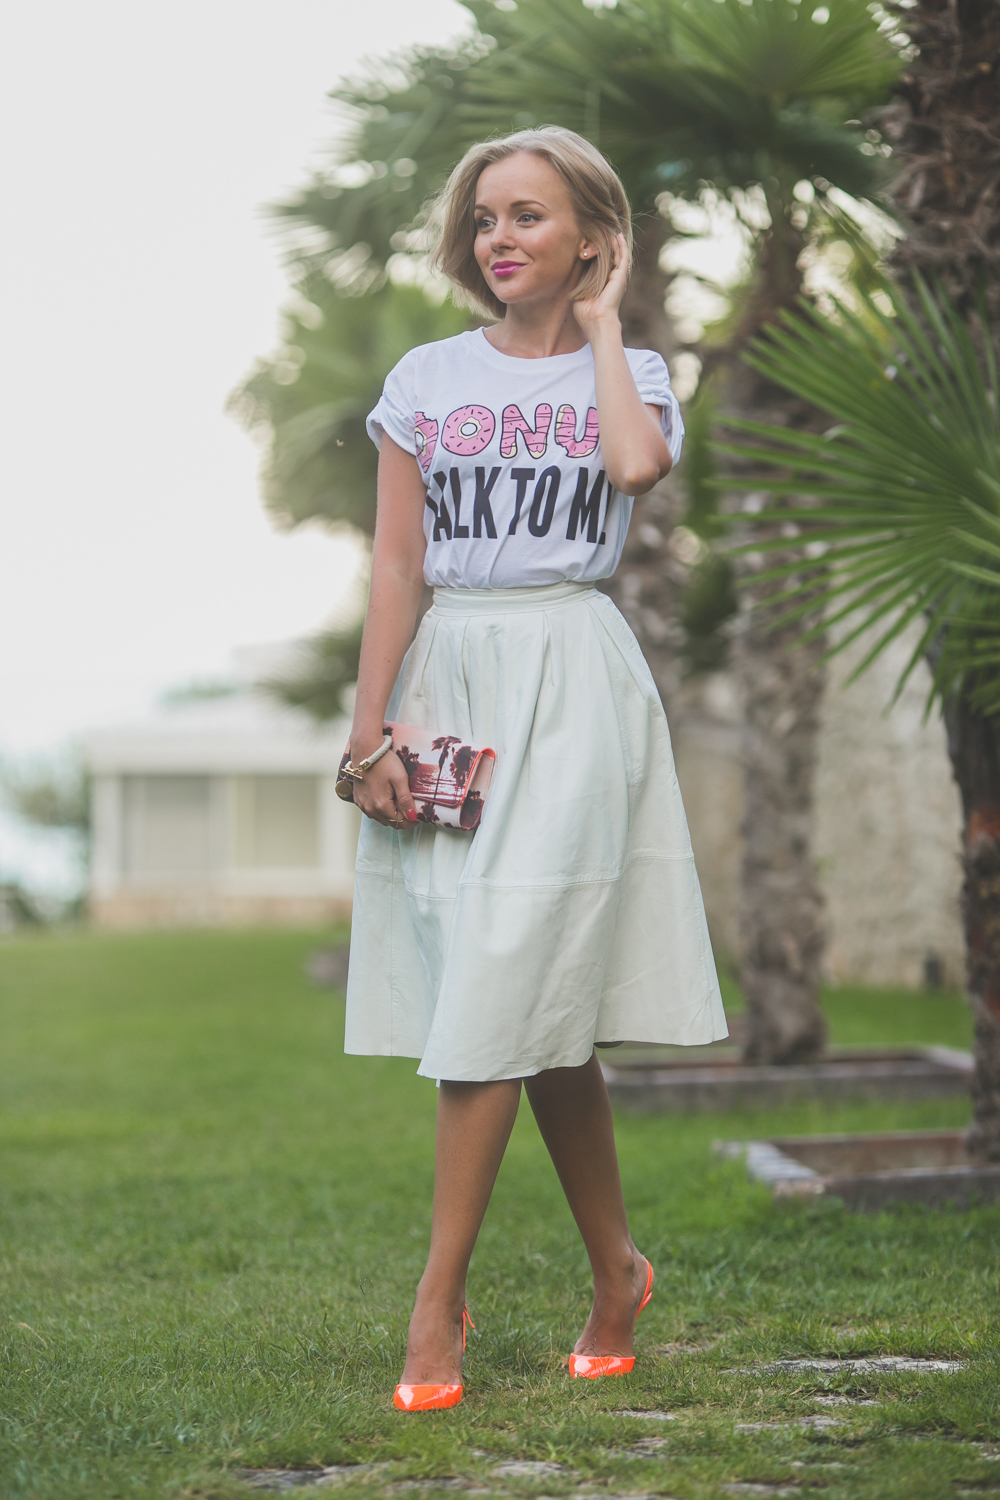 darya kamalova thecablook fashion lifestyle blogger from thecablook com in baia dei faraglioni in puglia south italy wearing river island leather white midi skirt with jimmy shoo heels sandals-3839